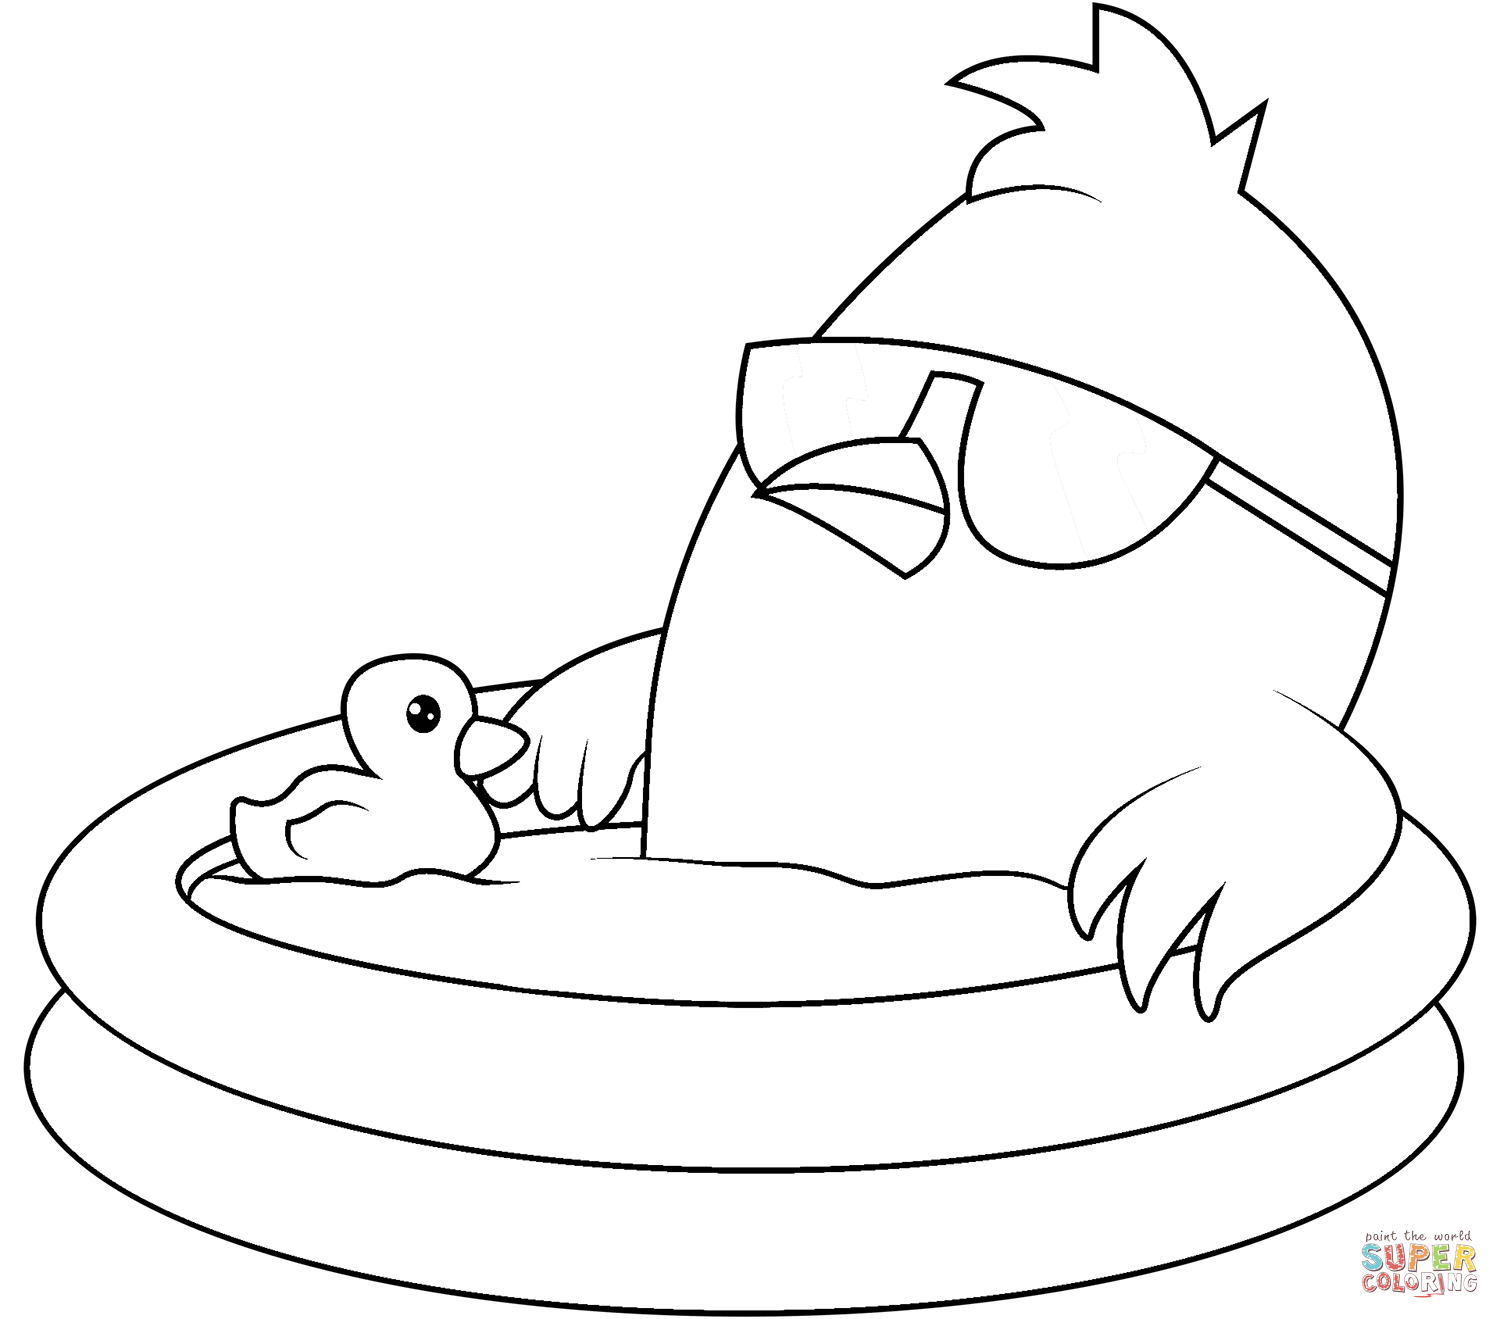 Cool chick is in inflatable pool with rubber duck coloring page free printable coloring pages